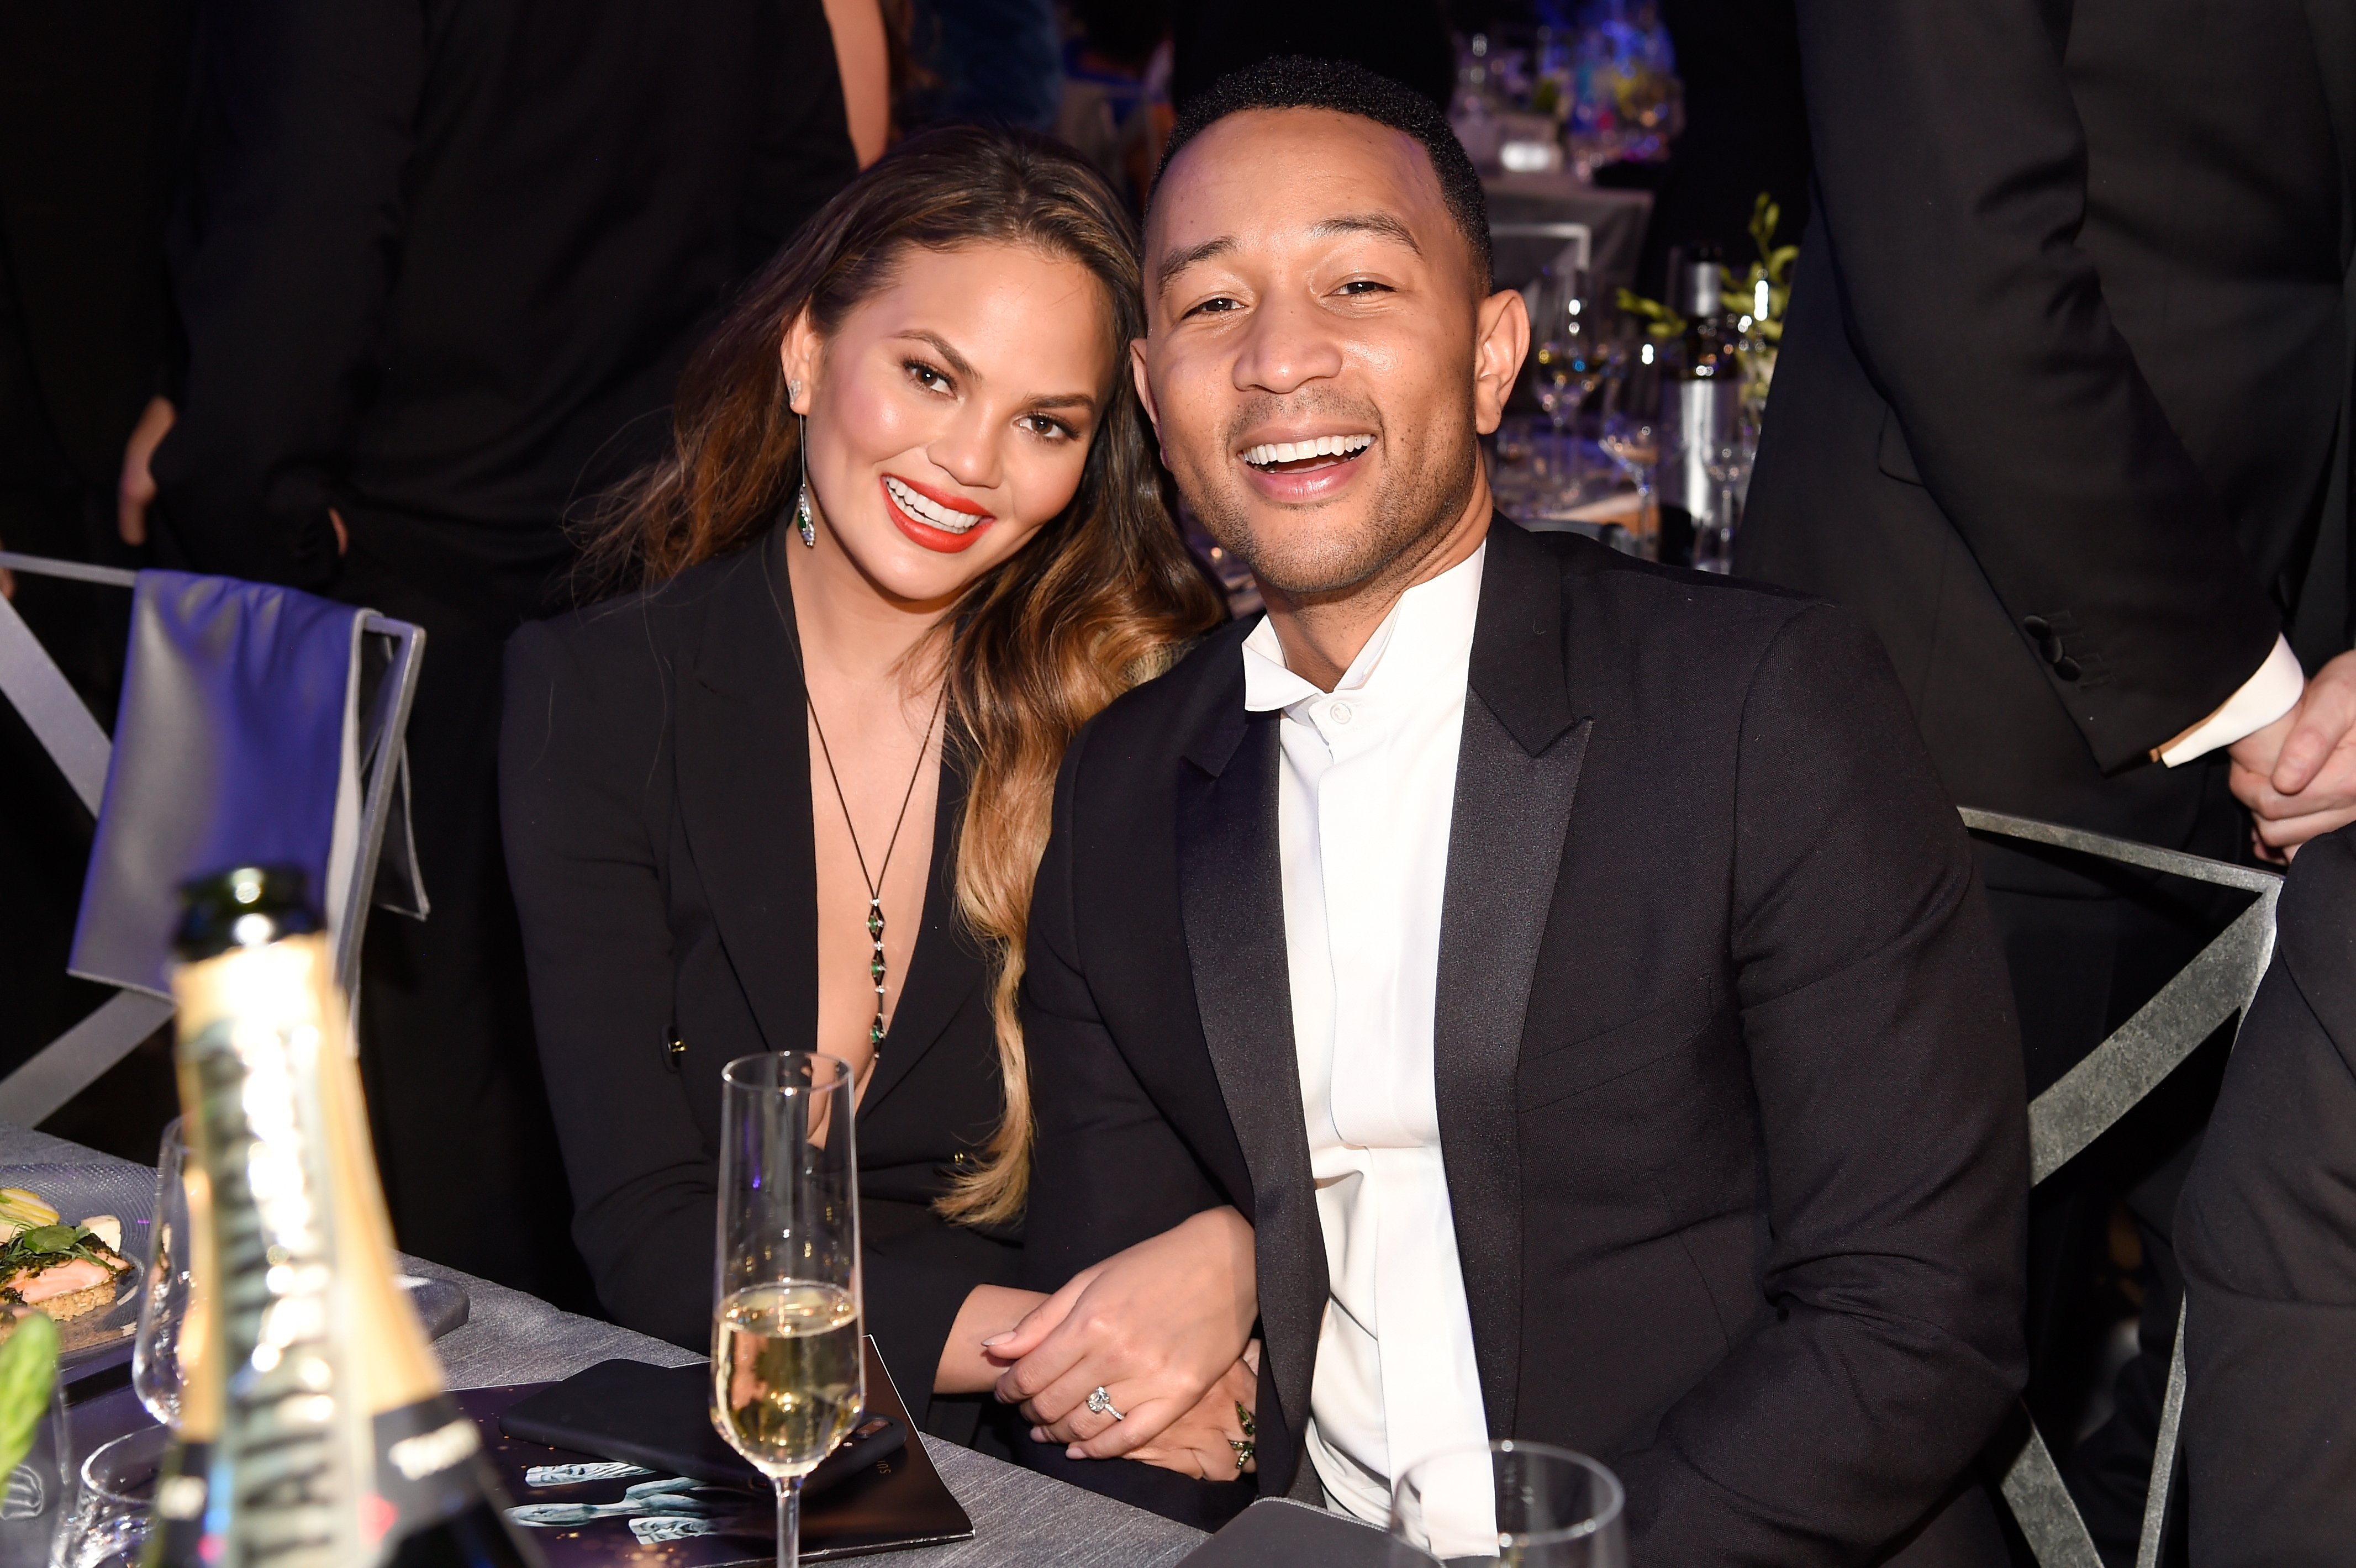 Chrissy Teigen (L) and artist John Legend during The 23rd Annual Screen Actors Guild Awards at The Shrine Auditorium on January 29, 2017 in Los Angeles, California. | Photo: Getty Images